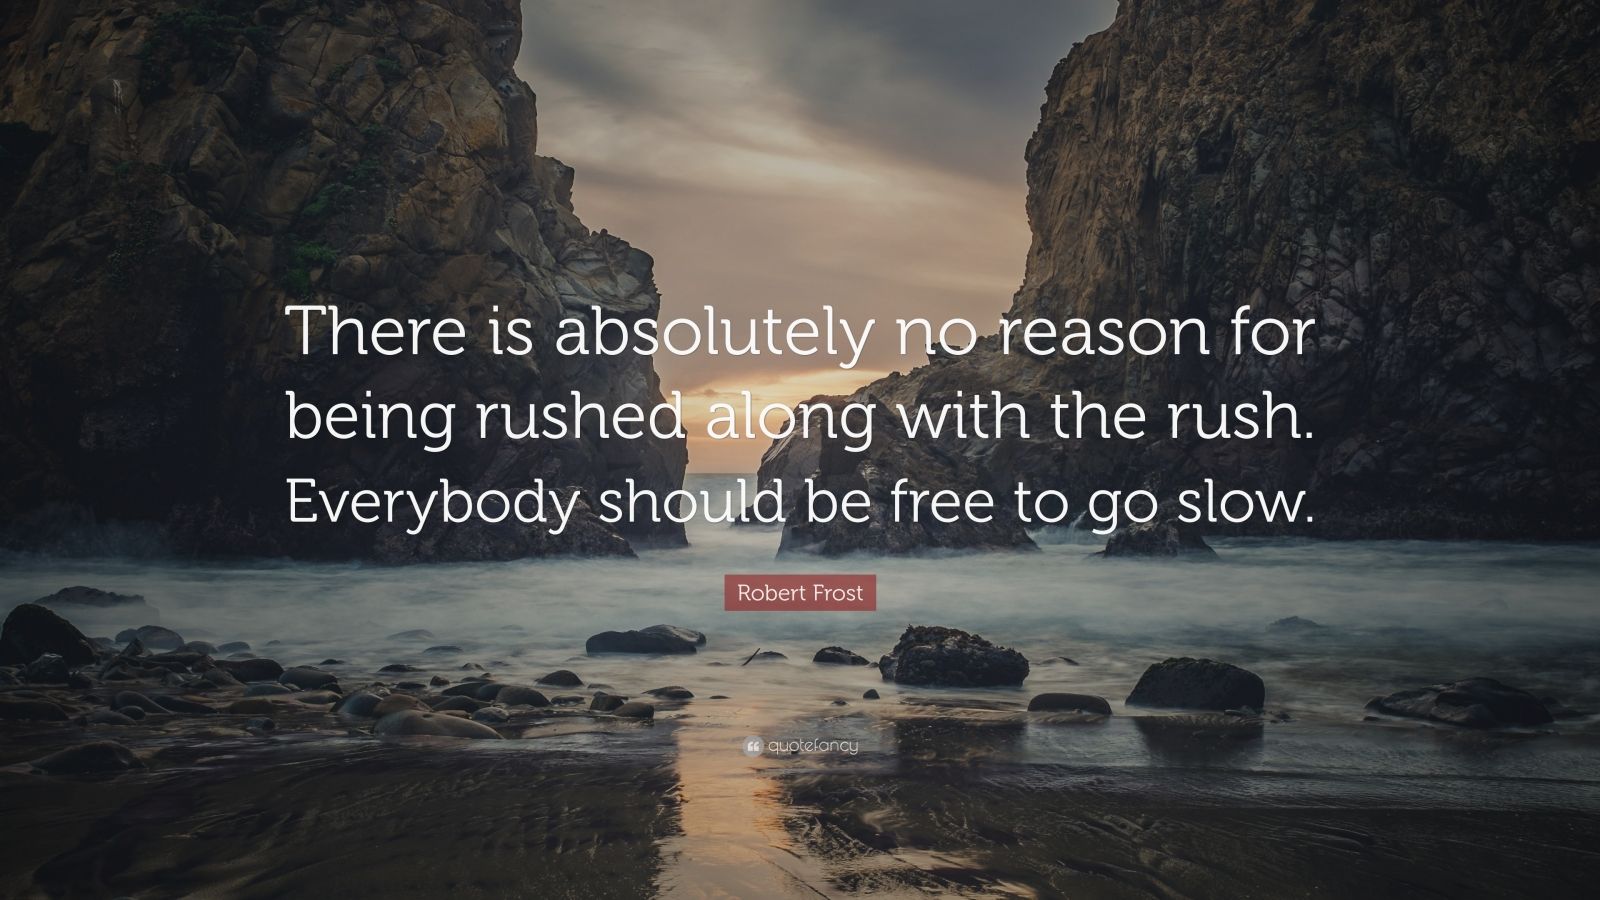 Robert Frost Quote: “There is absolutely no reason for being rushed ...